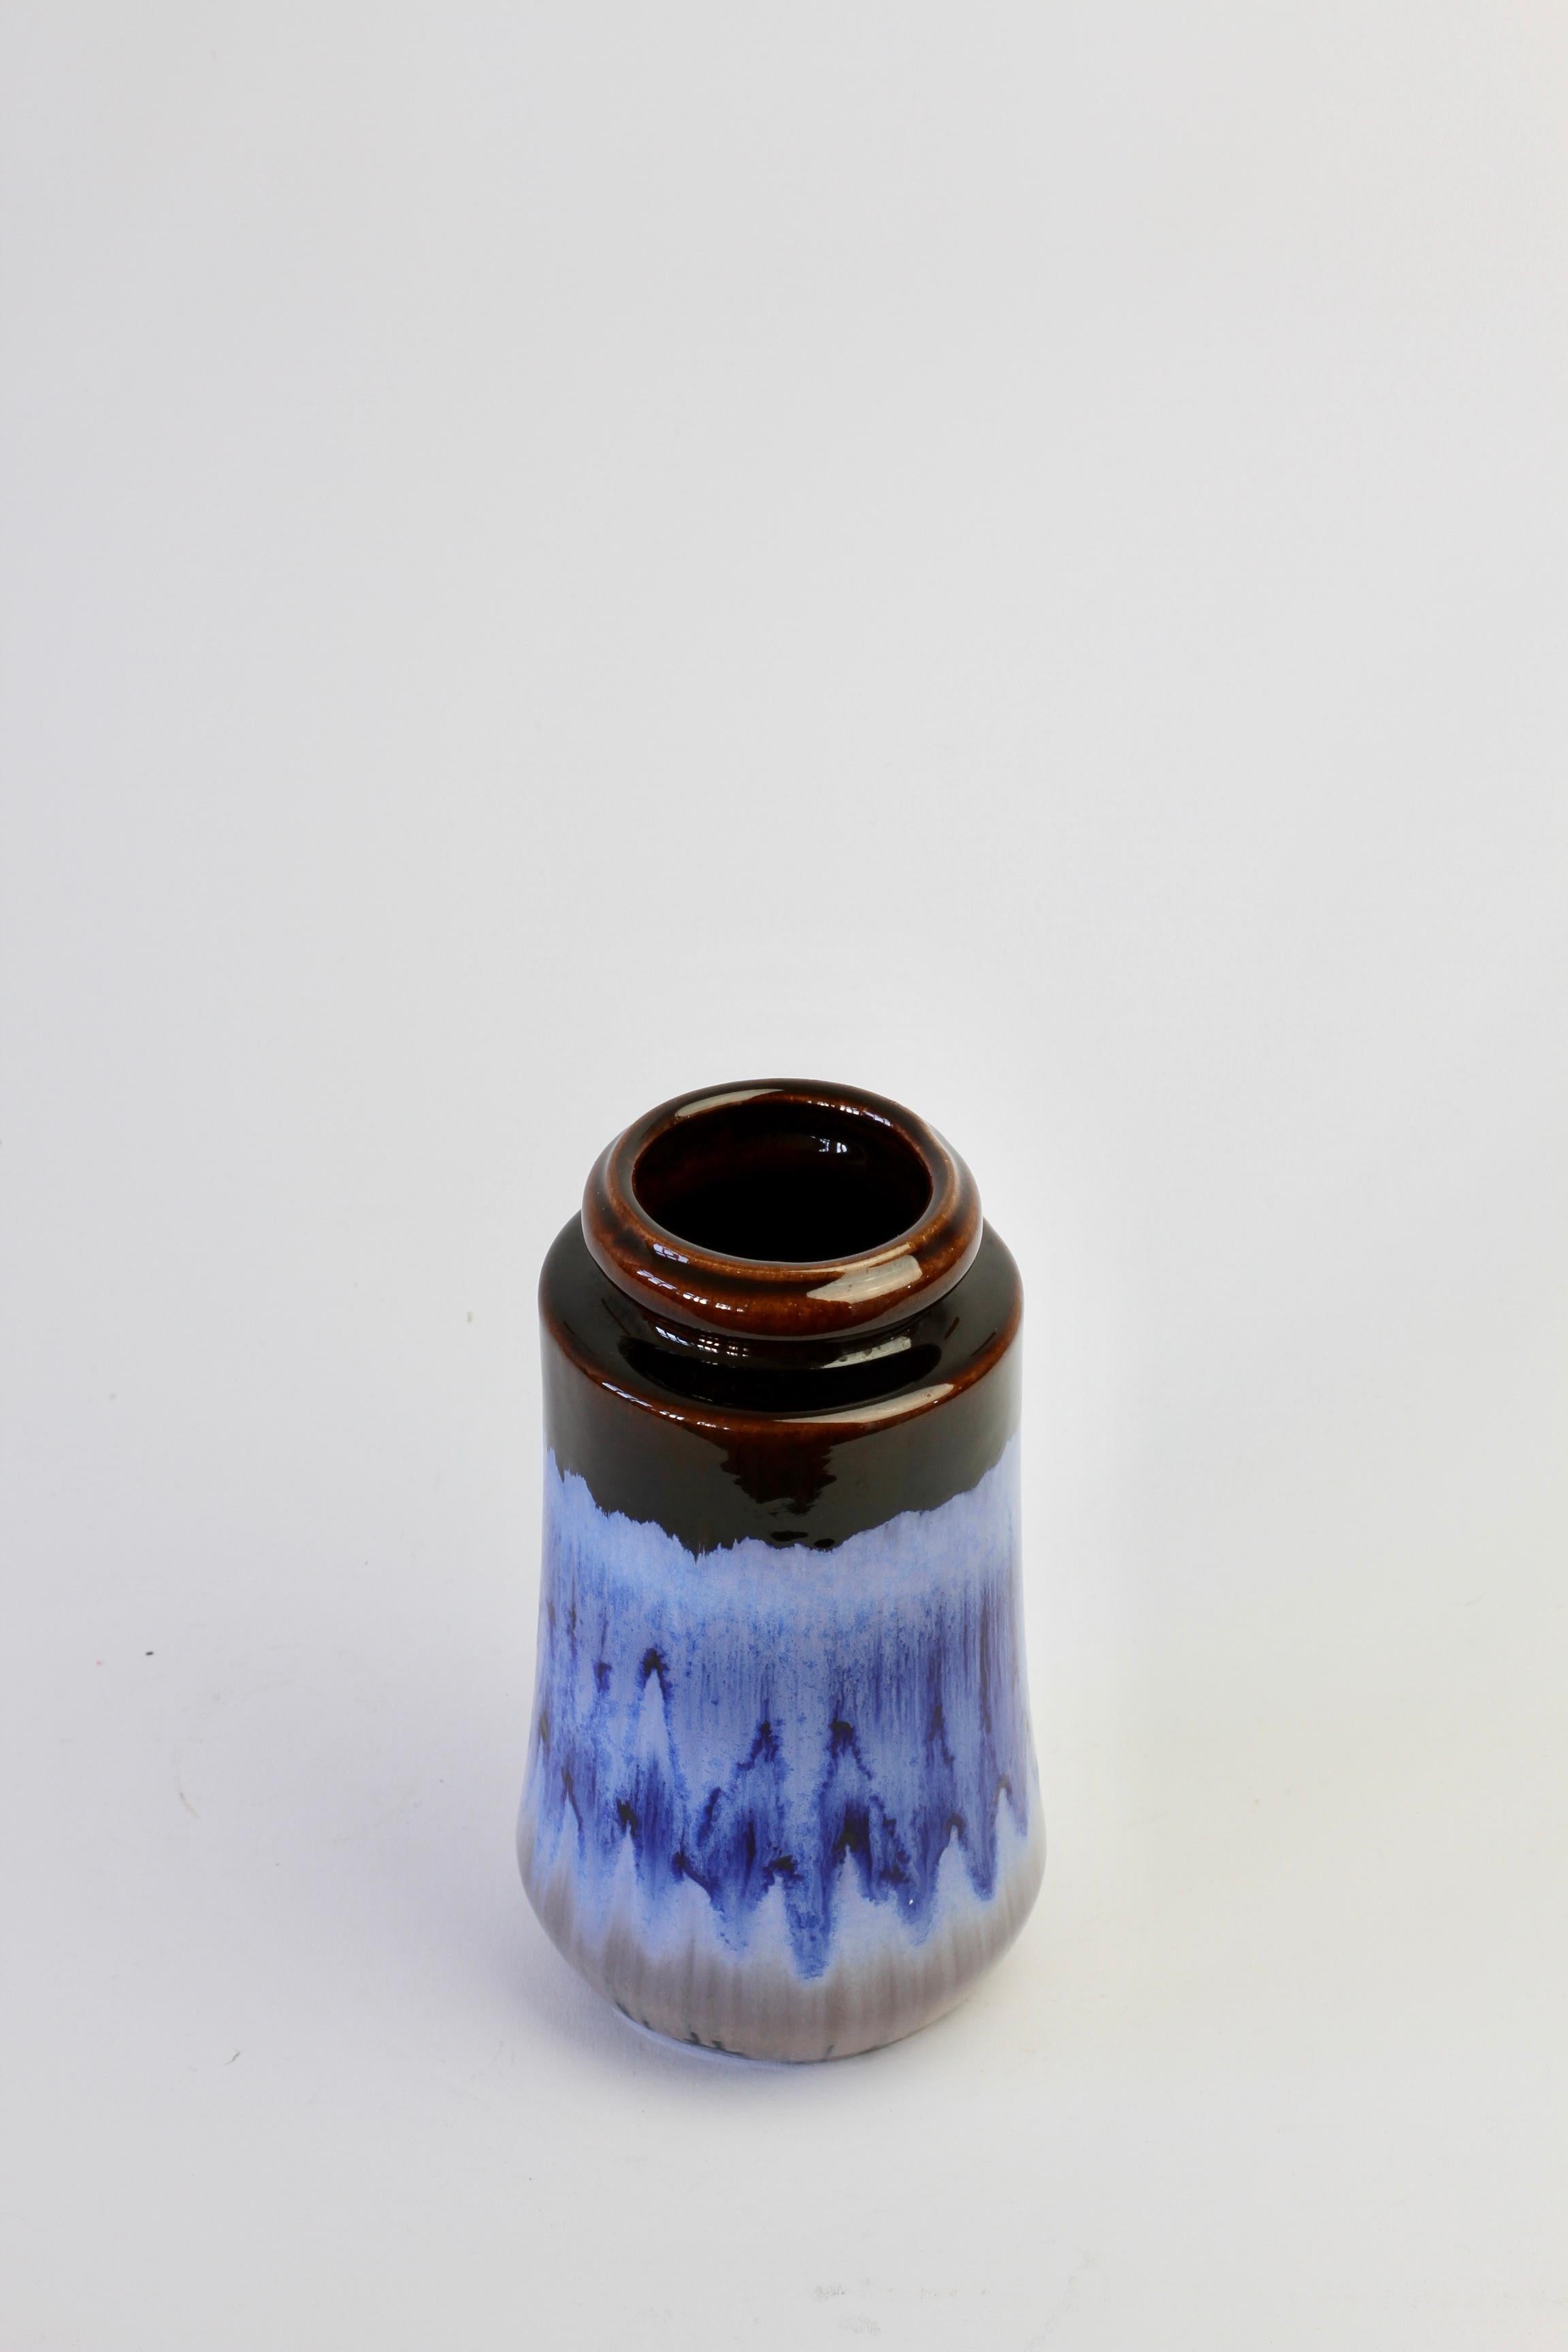 Gorgeous vintage Mid-Century vase by West German Pottery manufacturer Scheurich Keramik (Ceramic), circa 1965. Add a splash of color/colour to your home decor with this beautiful blue drip glaze.

Shape number 549 - 21.